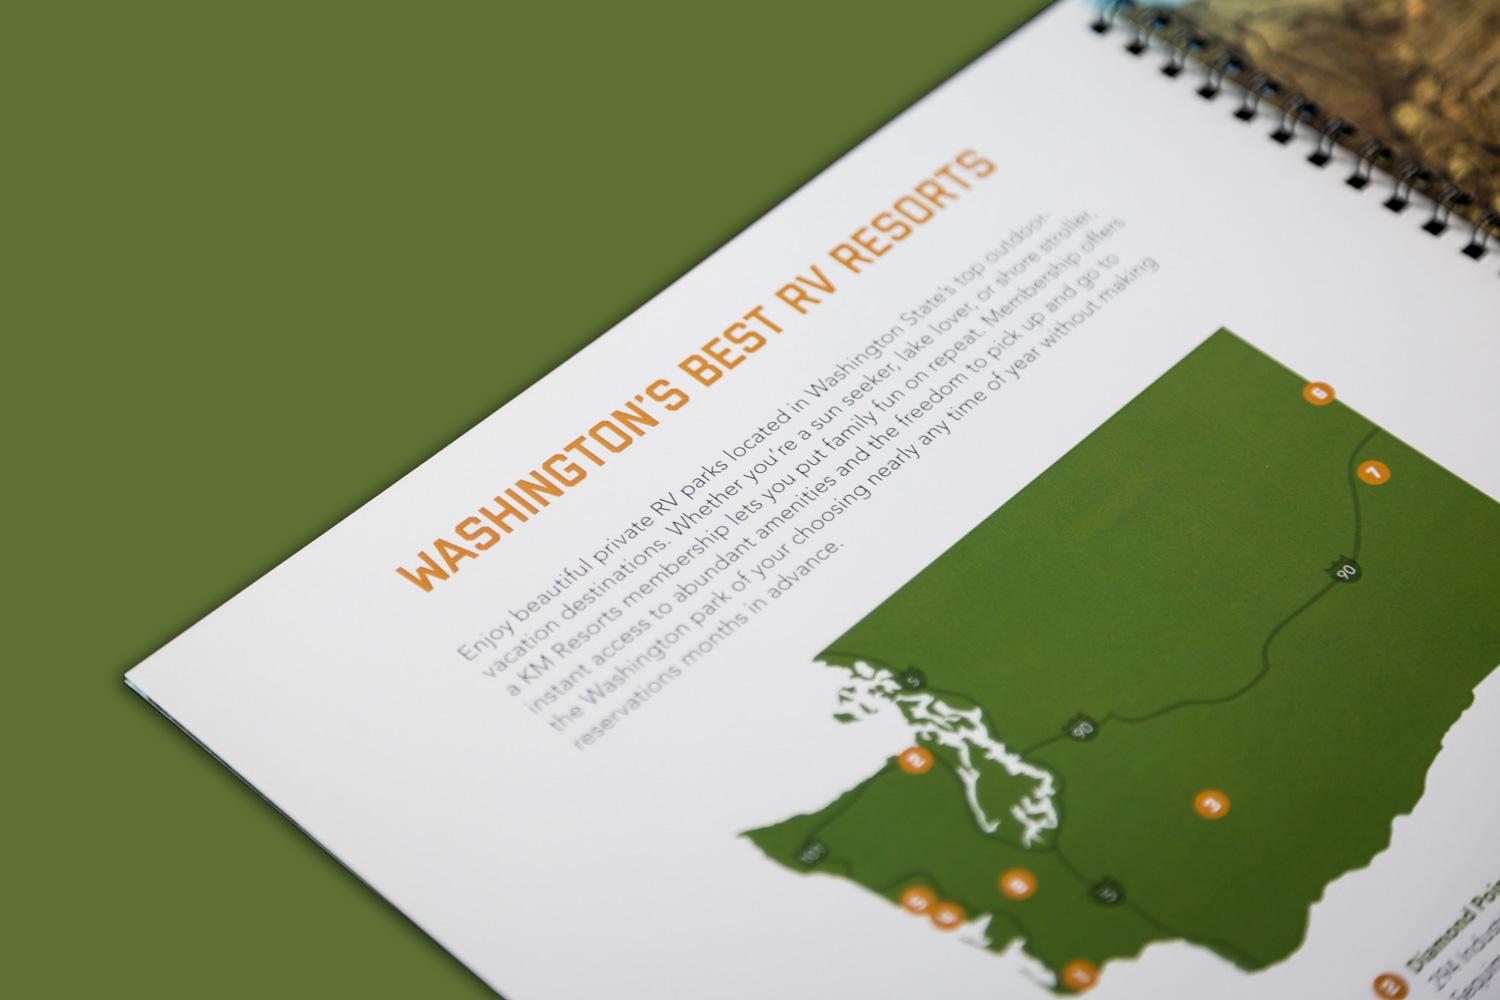 Detail image of KM Resorts brochure layout with a Washington map